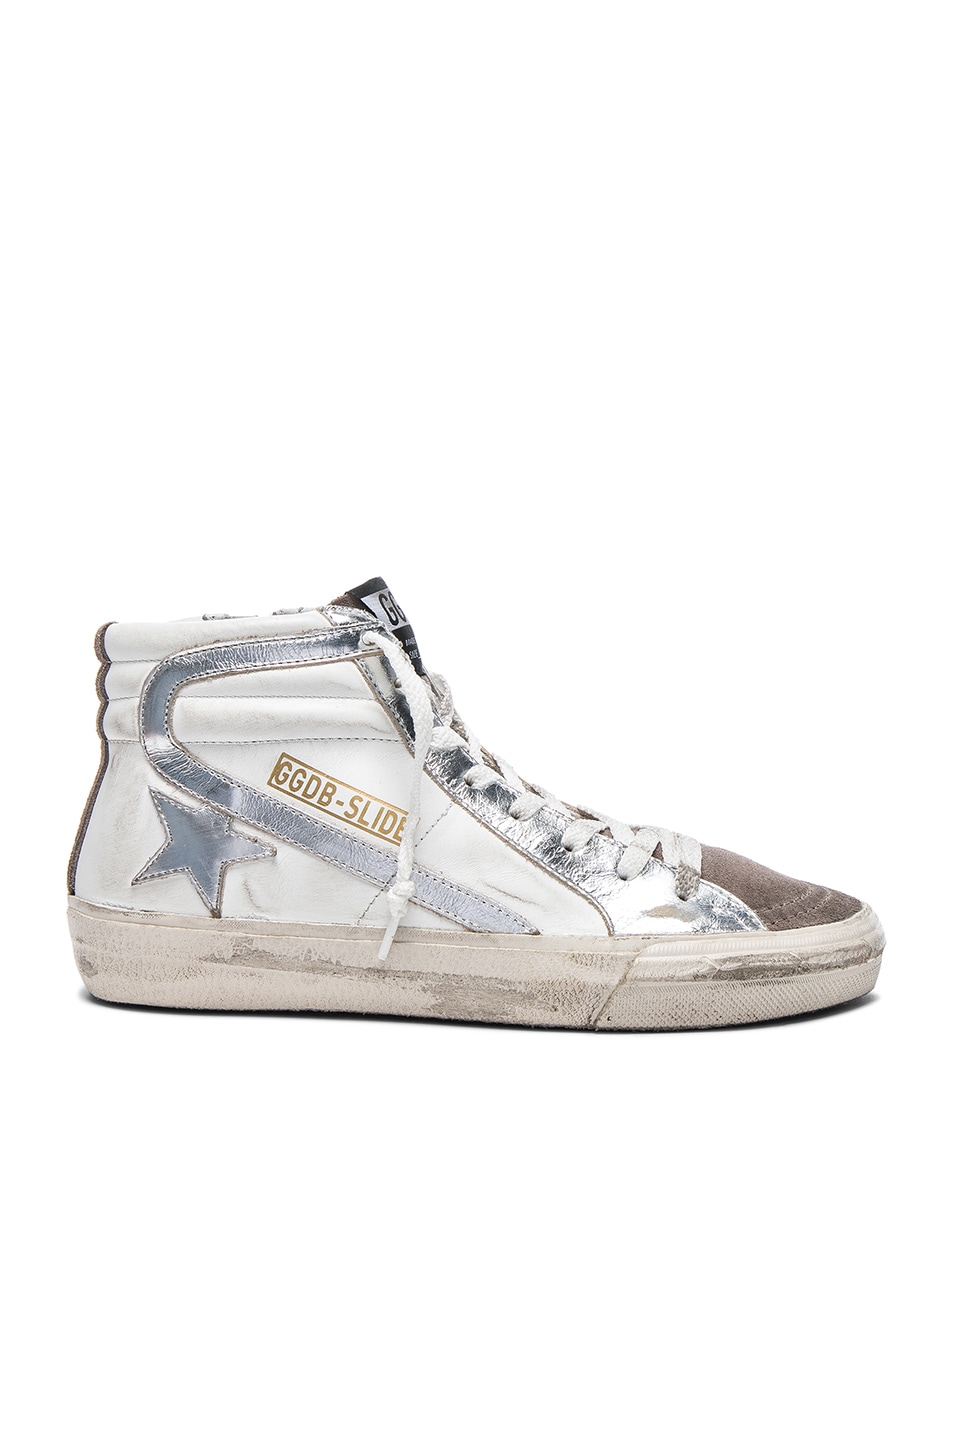 Image 1 of Golden Goose Leather Slide Sneakers in Silver & White